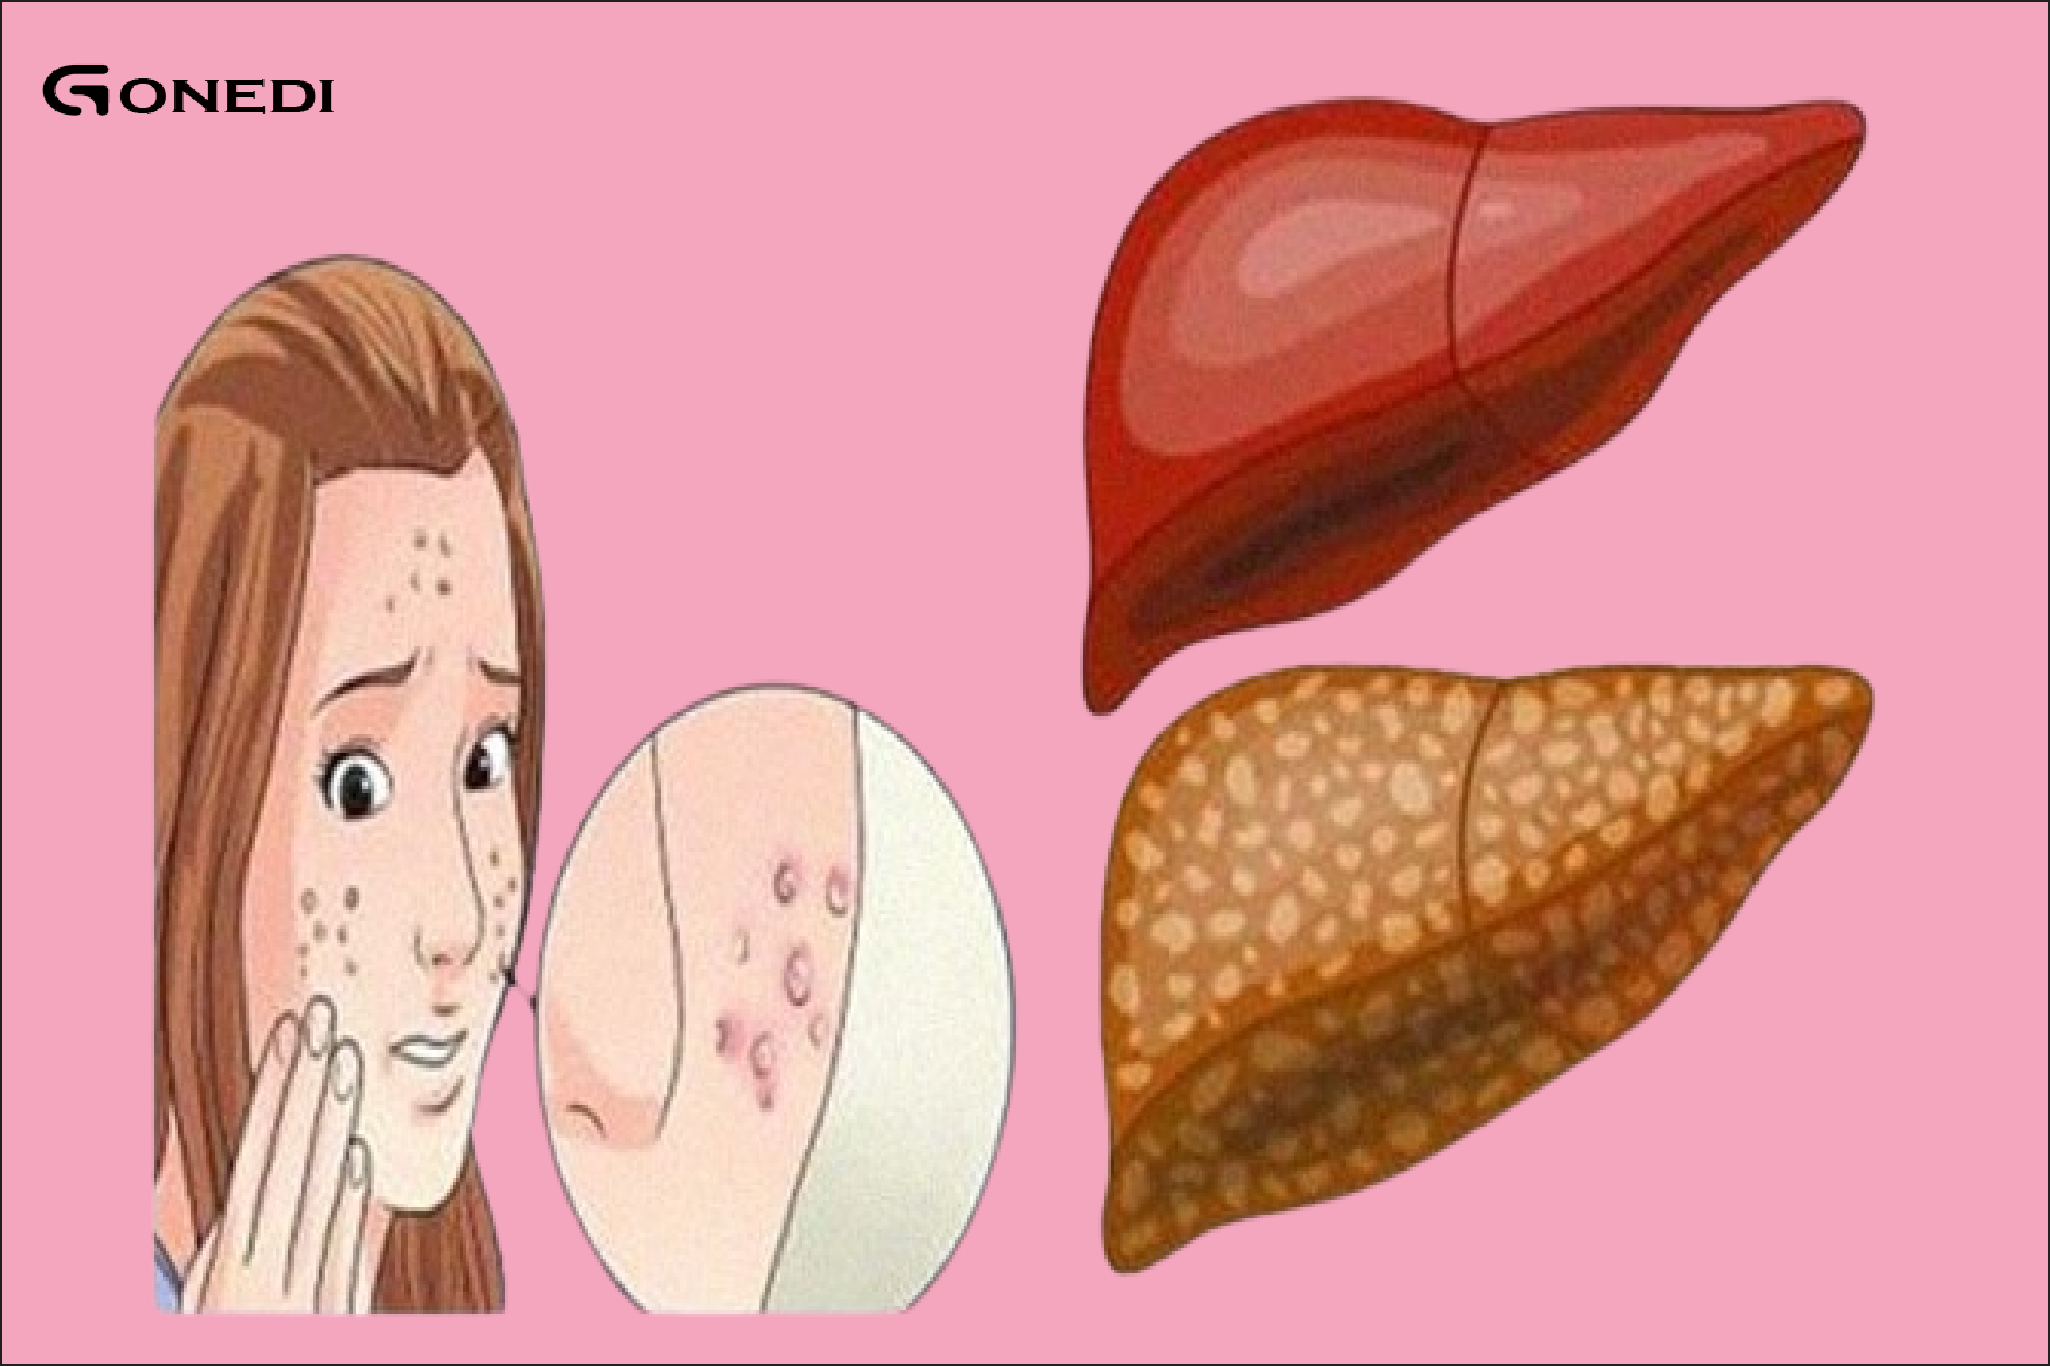 Screening for liver toxins: 6 warning signs and strategies for recovery